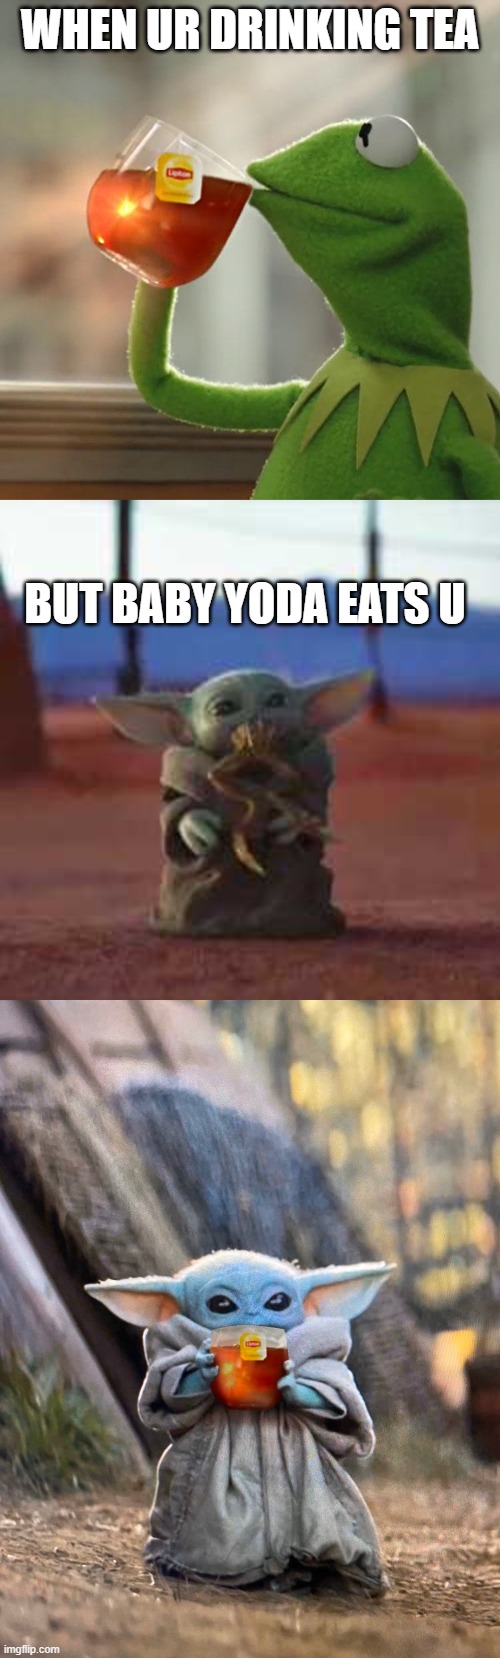 WHEN UR DRINKING TEA; BUT BABY YODA EATS U | image tagged in memes,but that's none of my business,baby yoda eats frog,baby yoda tea | made w/ Imgflip meme maker